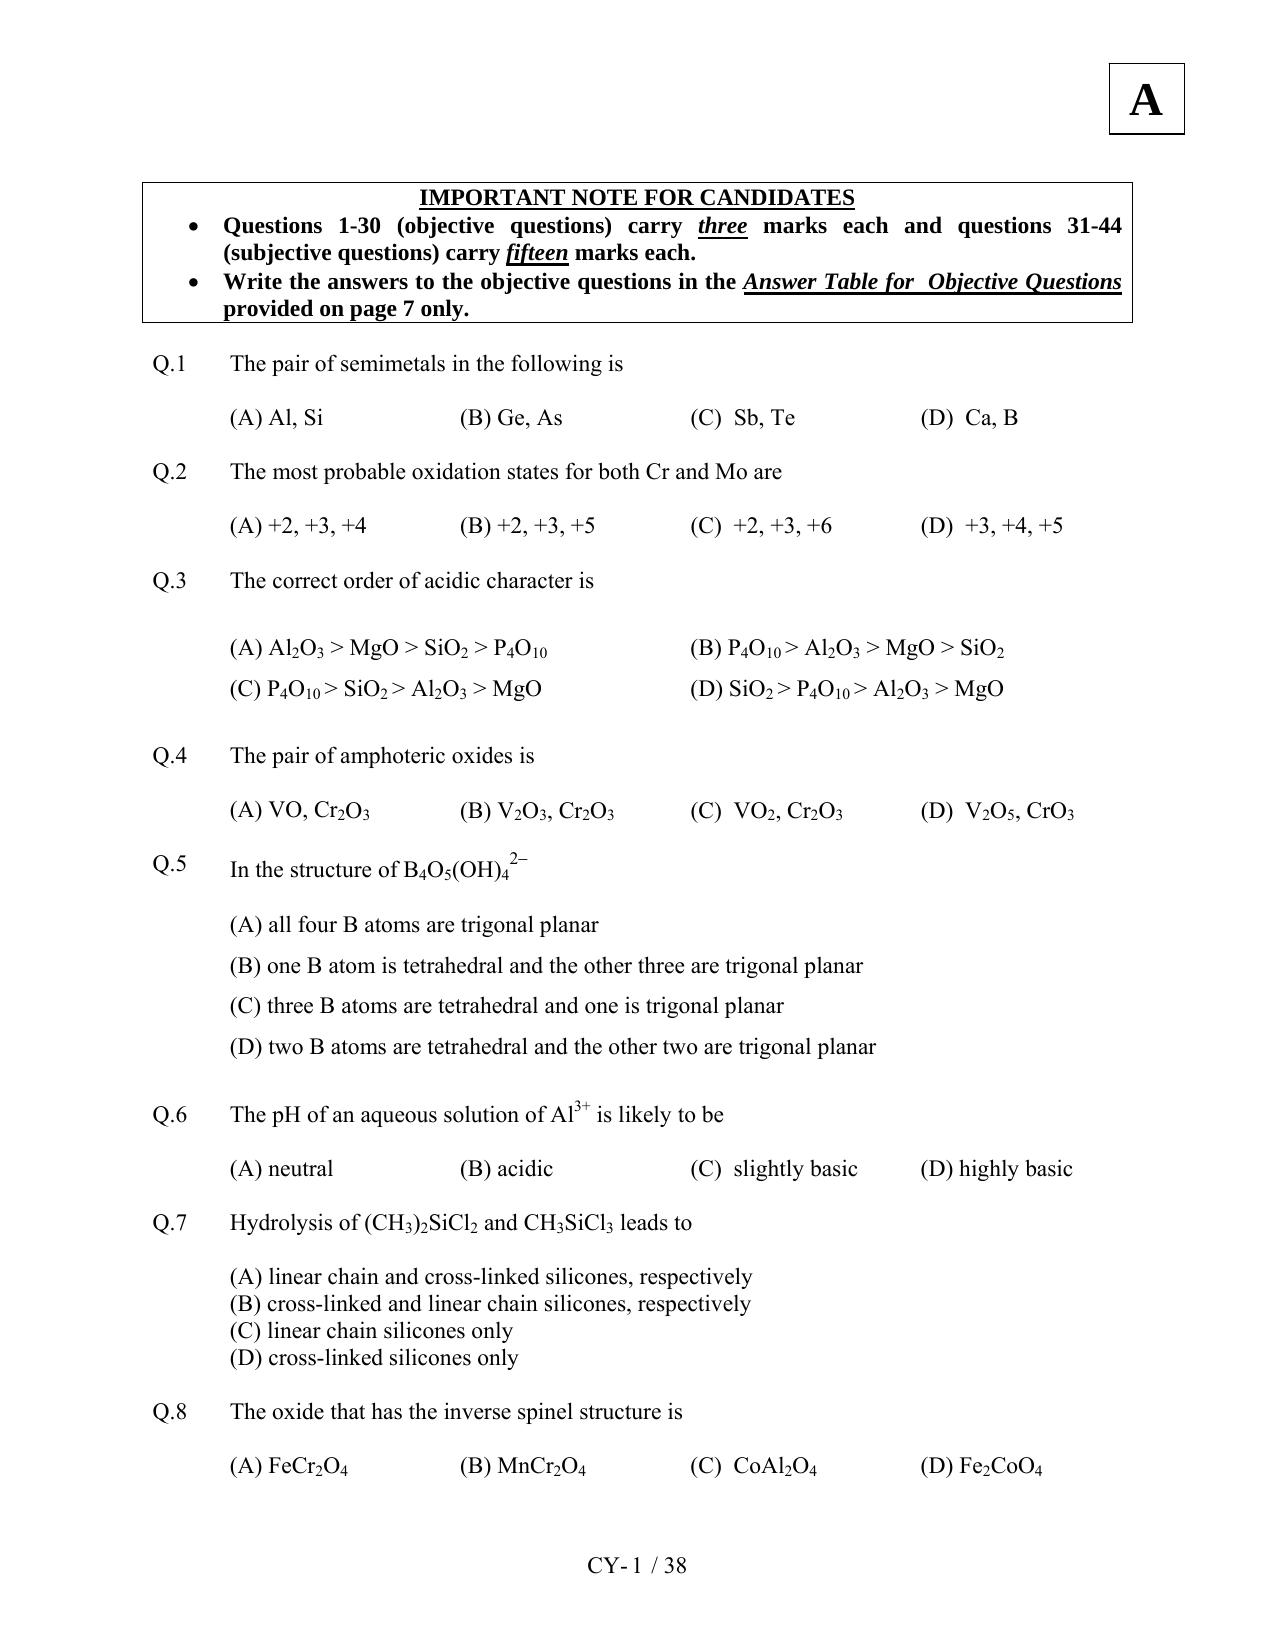 JAM 2011: CY Question Paper - Page 3